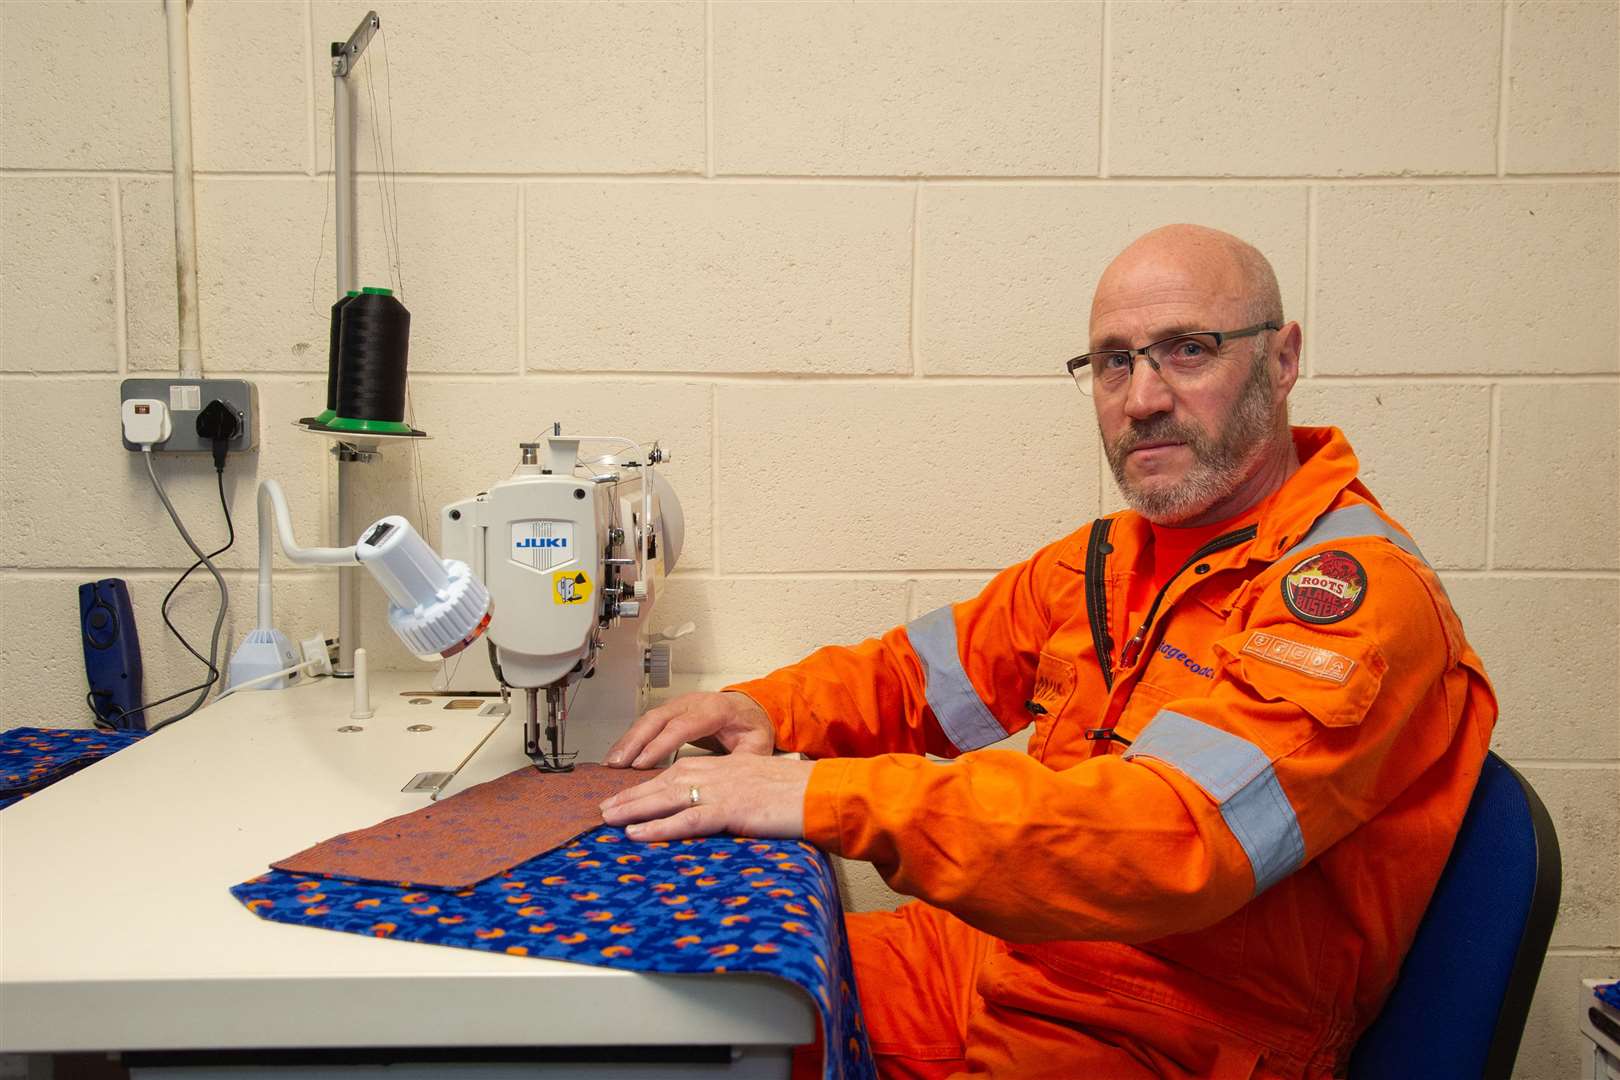 Martin Boon, from Hopeman, has been using his work skills as a Stagecoach trimmer to sew scrubs for local health workers as part of the Moray Scrubs effort. Picture: Daniel Forsyth.